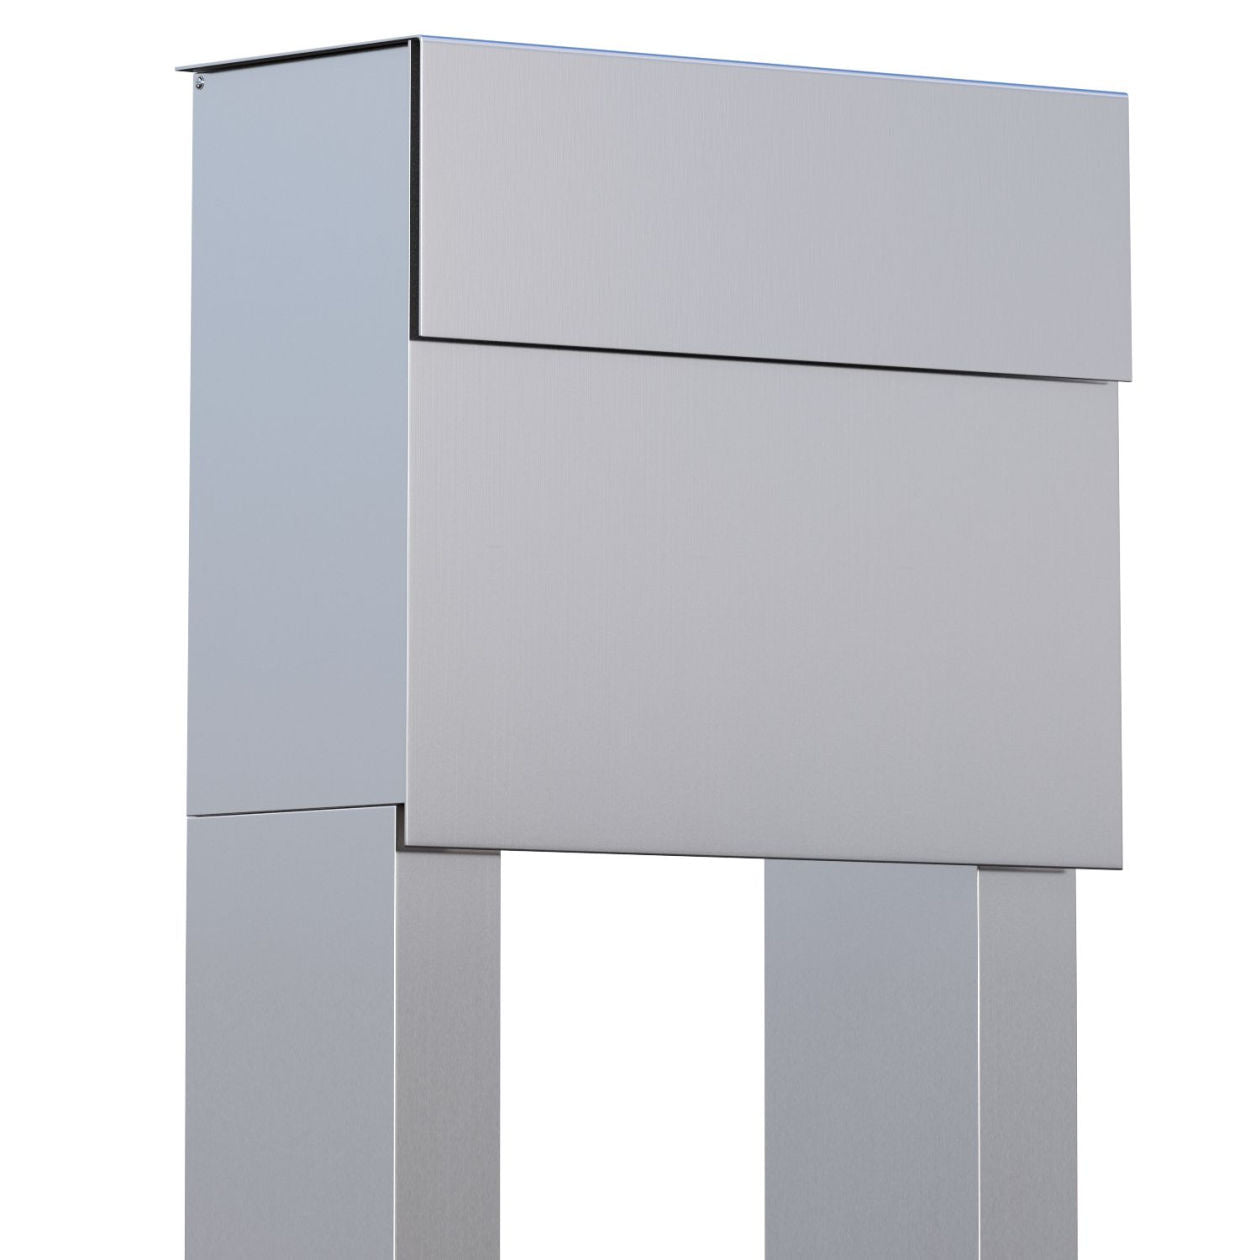 STAND MOLTO by Bravios - Modern post-mounted gray mailbox